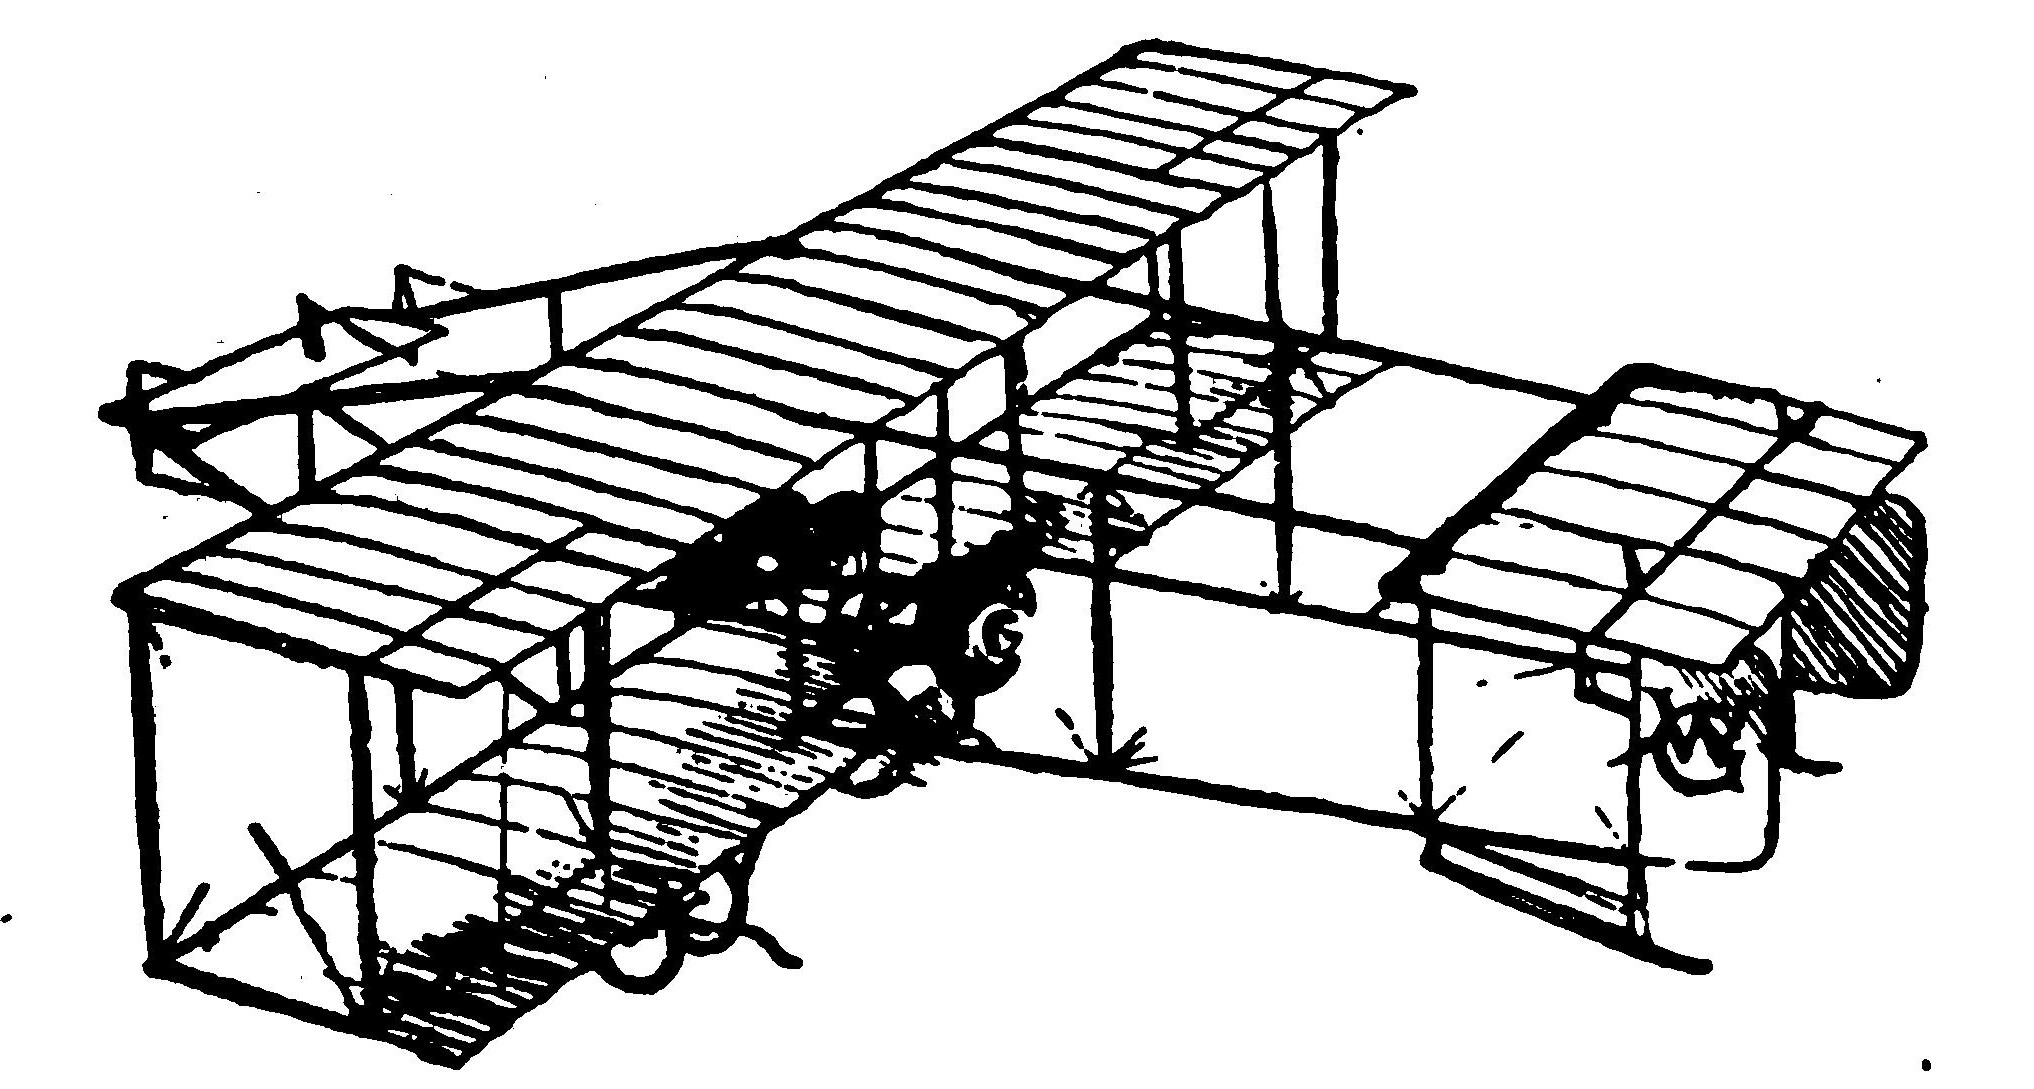 Fig. 6. Pusher Type Biplane in Which the Propeller Is Placed Behind the Wings.